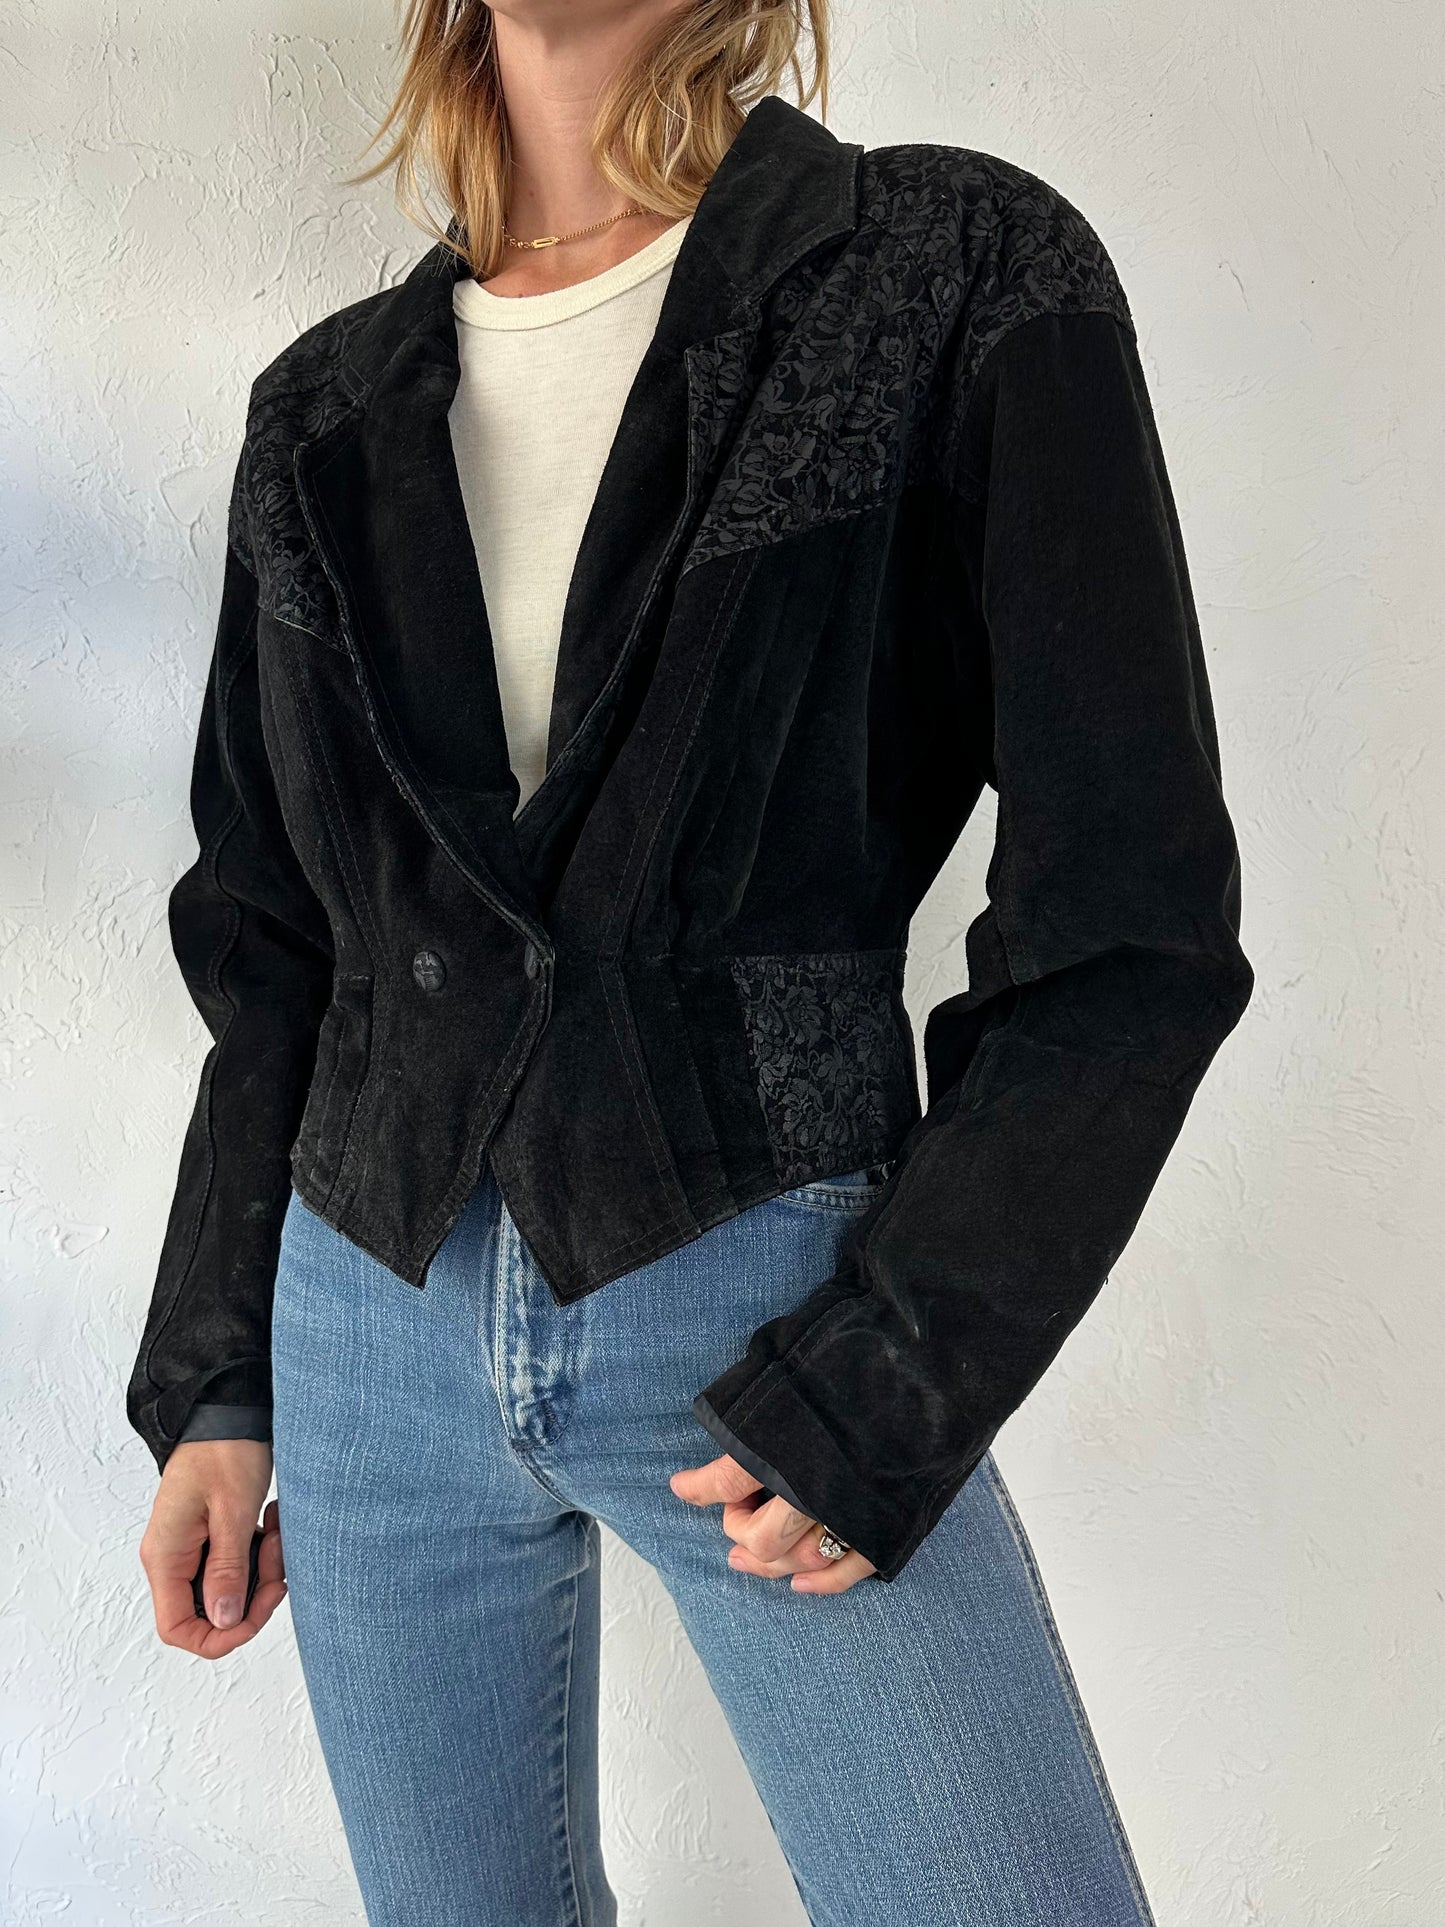 80s 'Chia' Black Embossed Suede Leather Jacket / Small - Medium